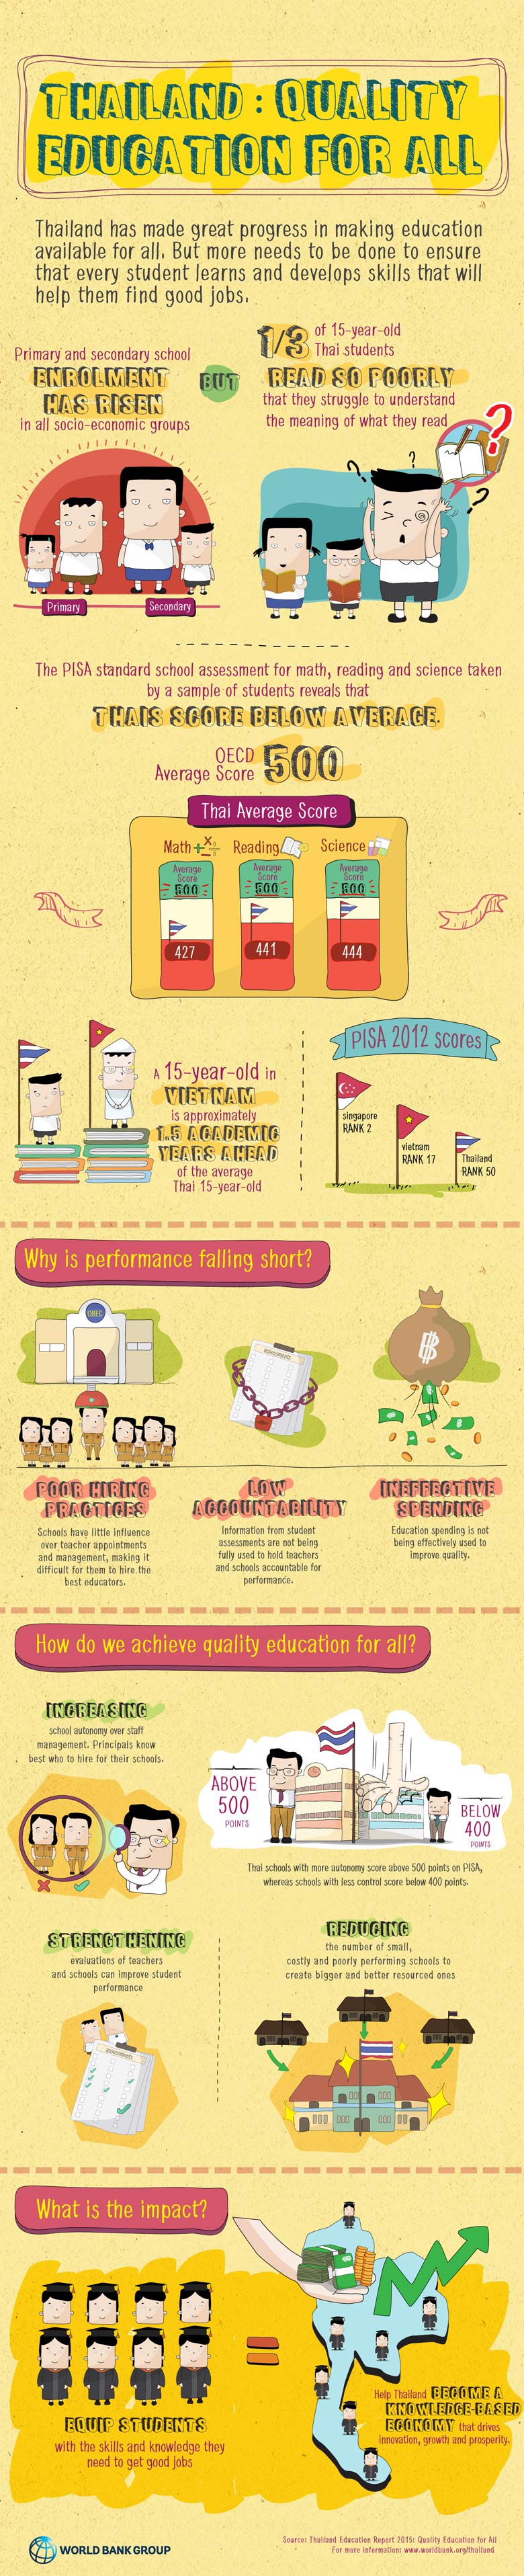 Thailand Infographic Quality Education for All